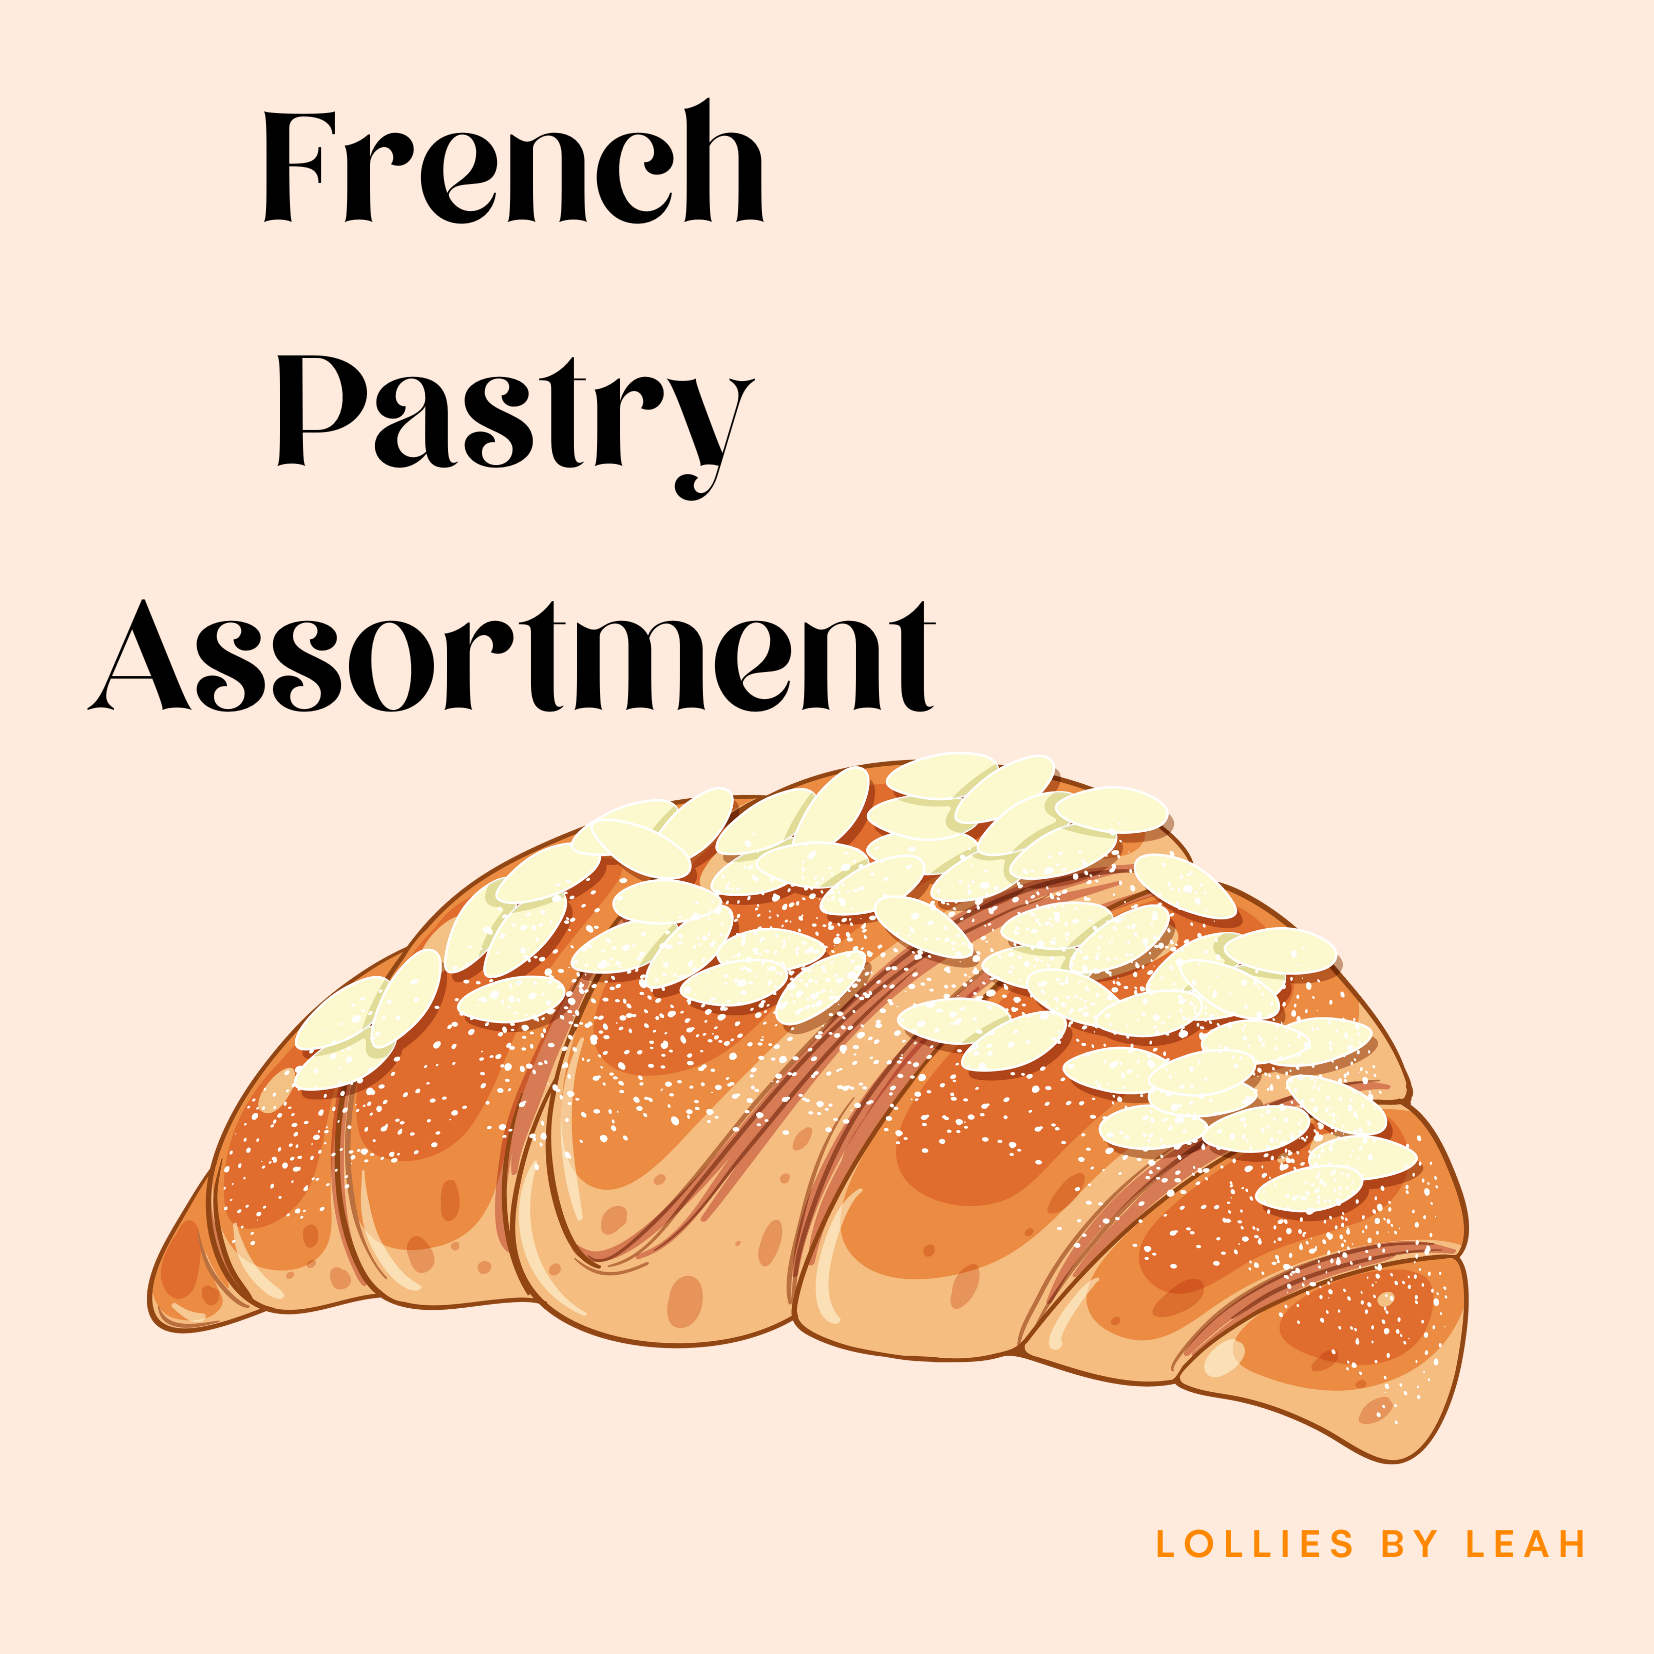 FRENCH PASTY ASSORTMENT - 6 Lollies